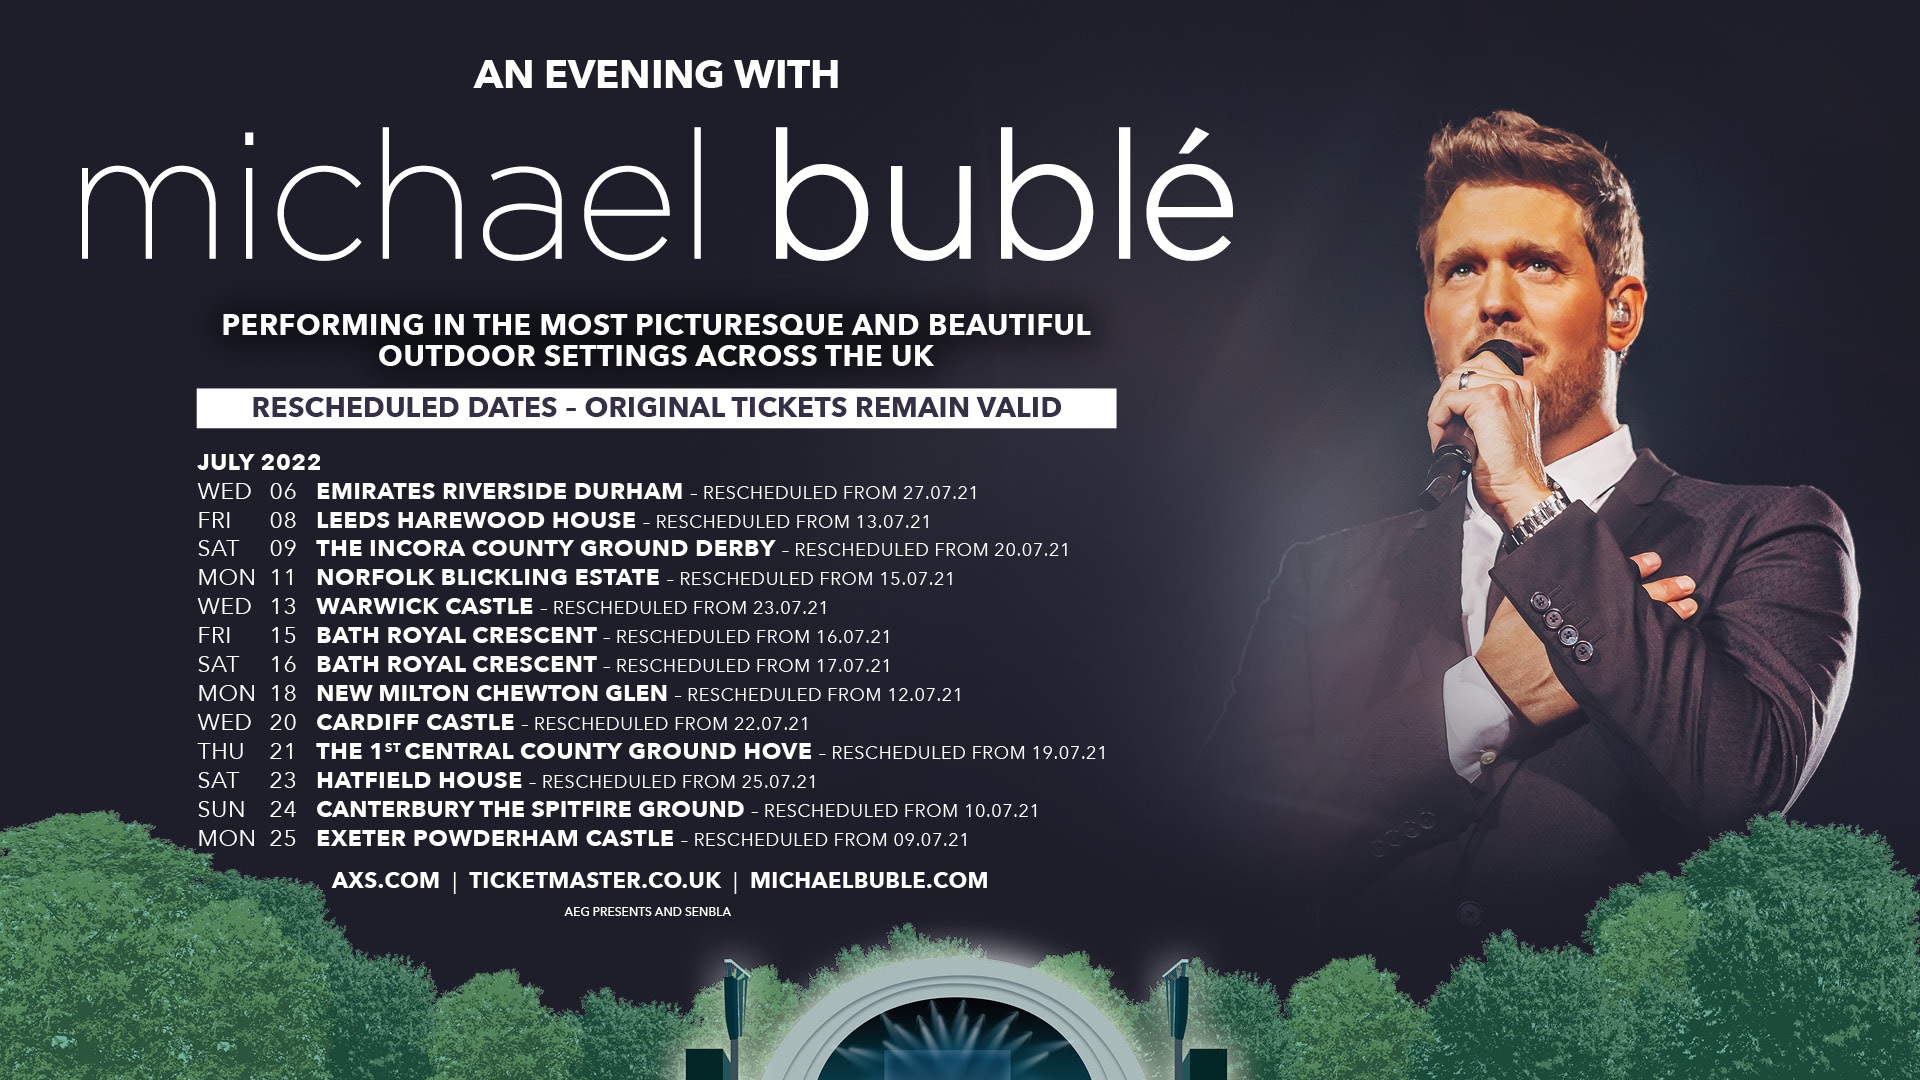 'An evening with Michael Bublé - performing in the most picturesque and beautiful outdoor settings across the uk'